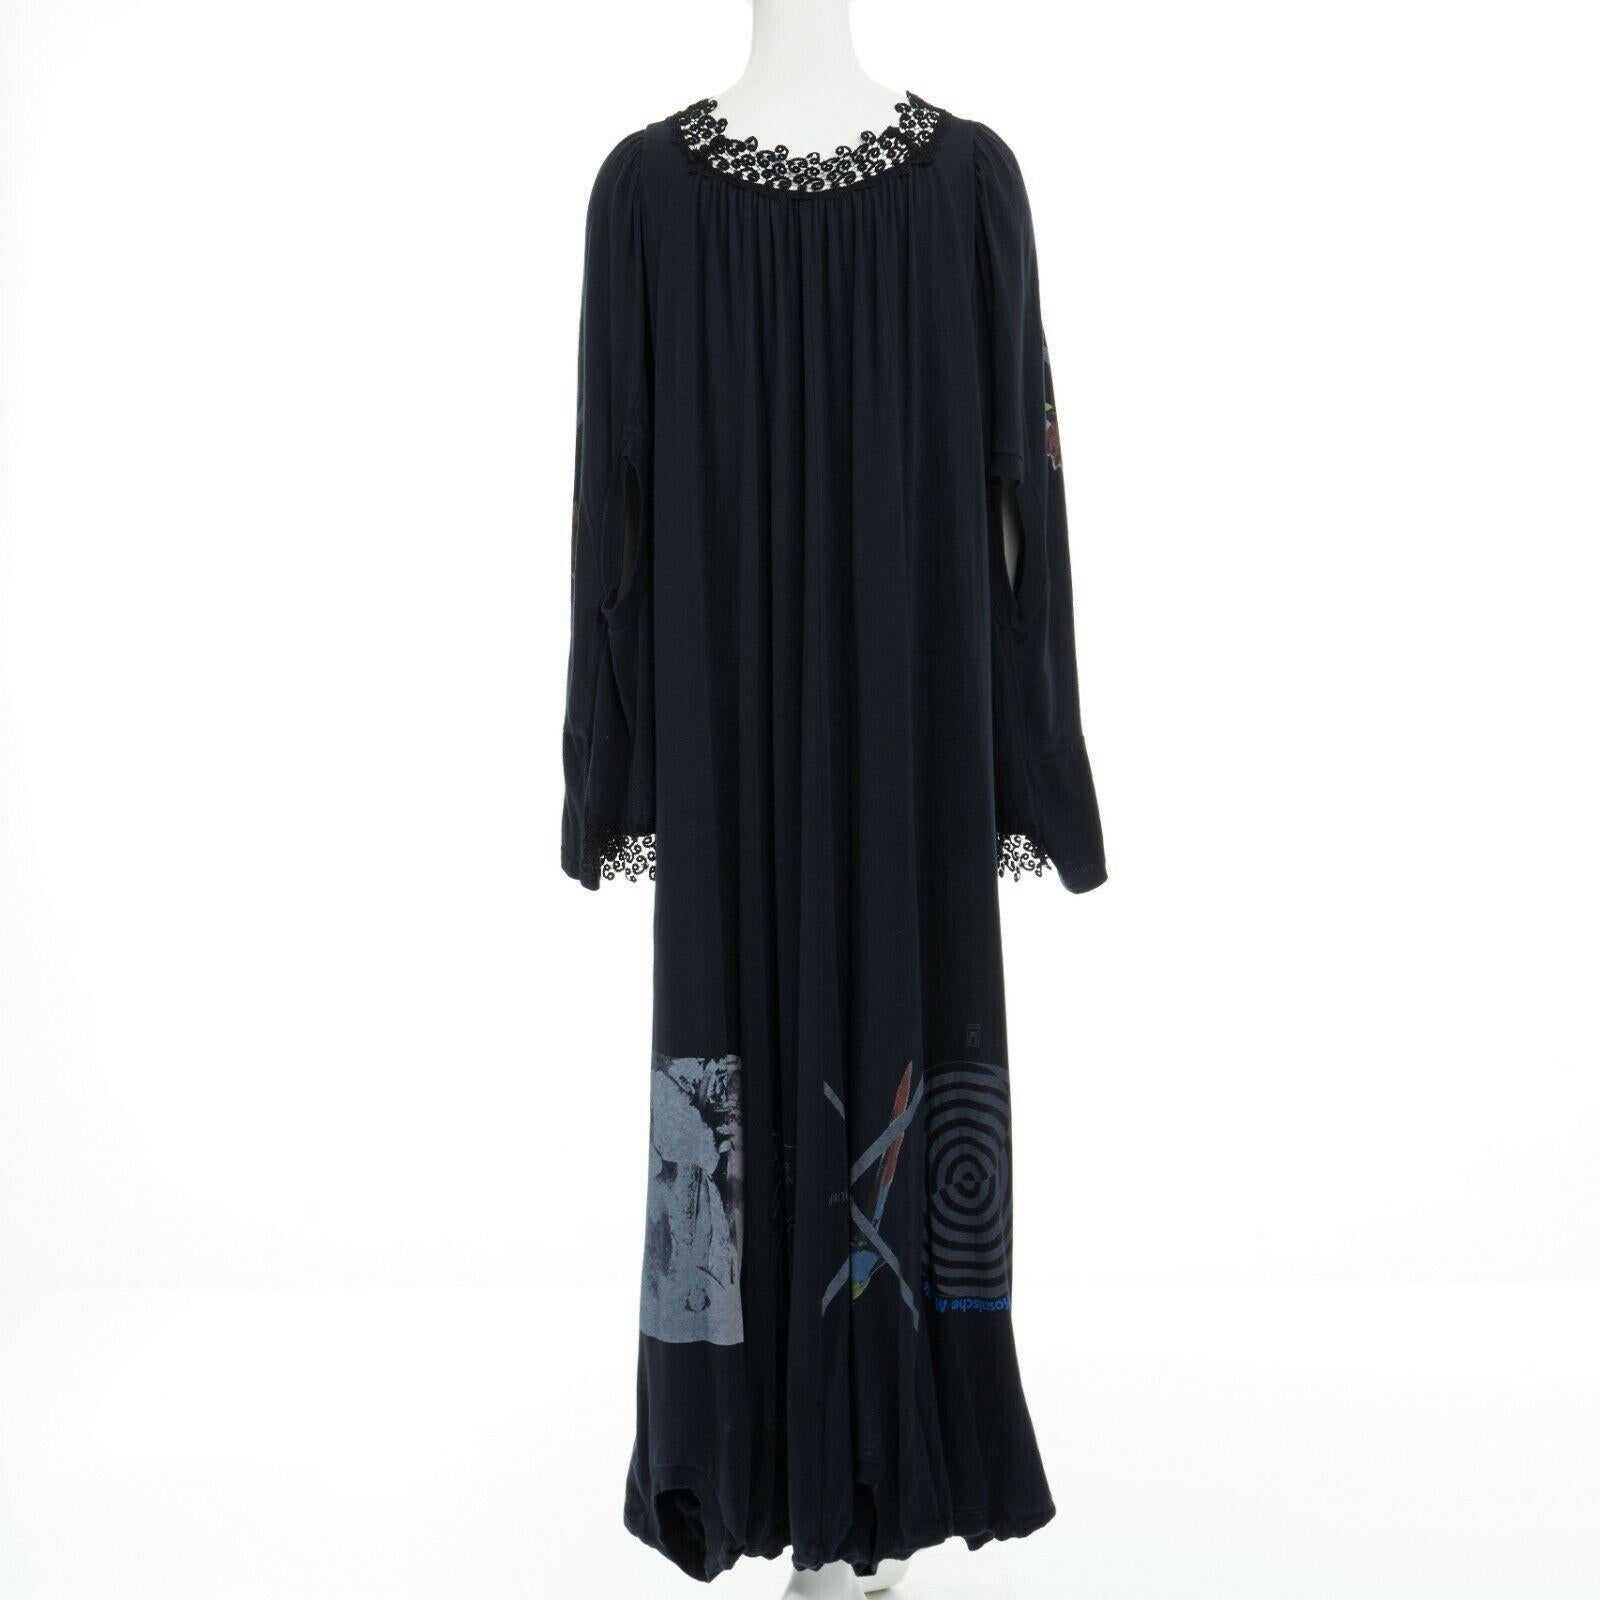 runway UNDERCOVER black deconstructed cotton t-shirt lace trimmed maxi dress JP1
UNDERCOVER
FROM THE SPRING SUMMER 2006 RUNWAY
100% cotton. Black washed cotton. 
Deconstructed and reconstructed from many printed t-shirts. 
Scoop neckline. Lace